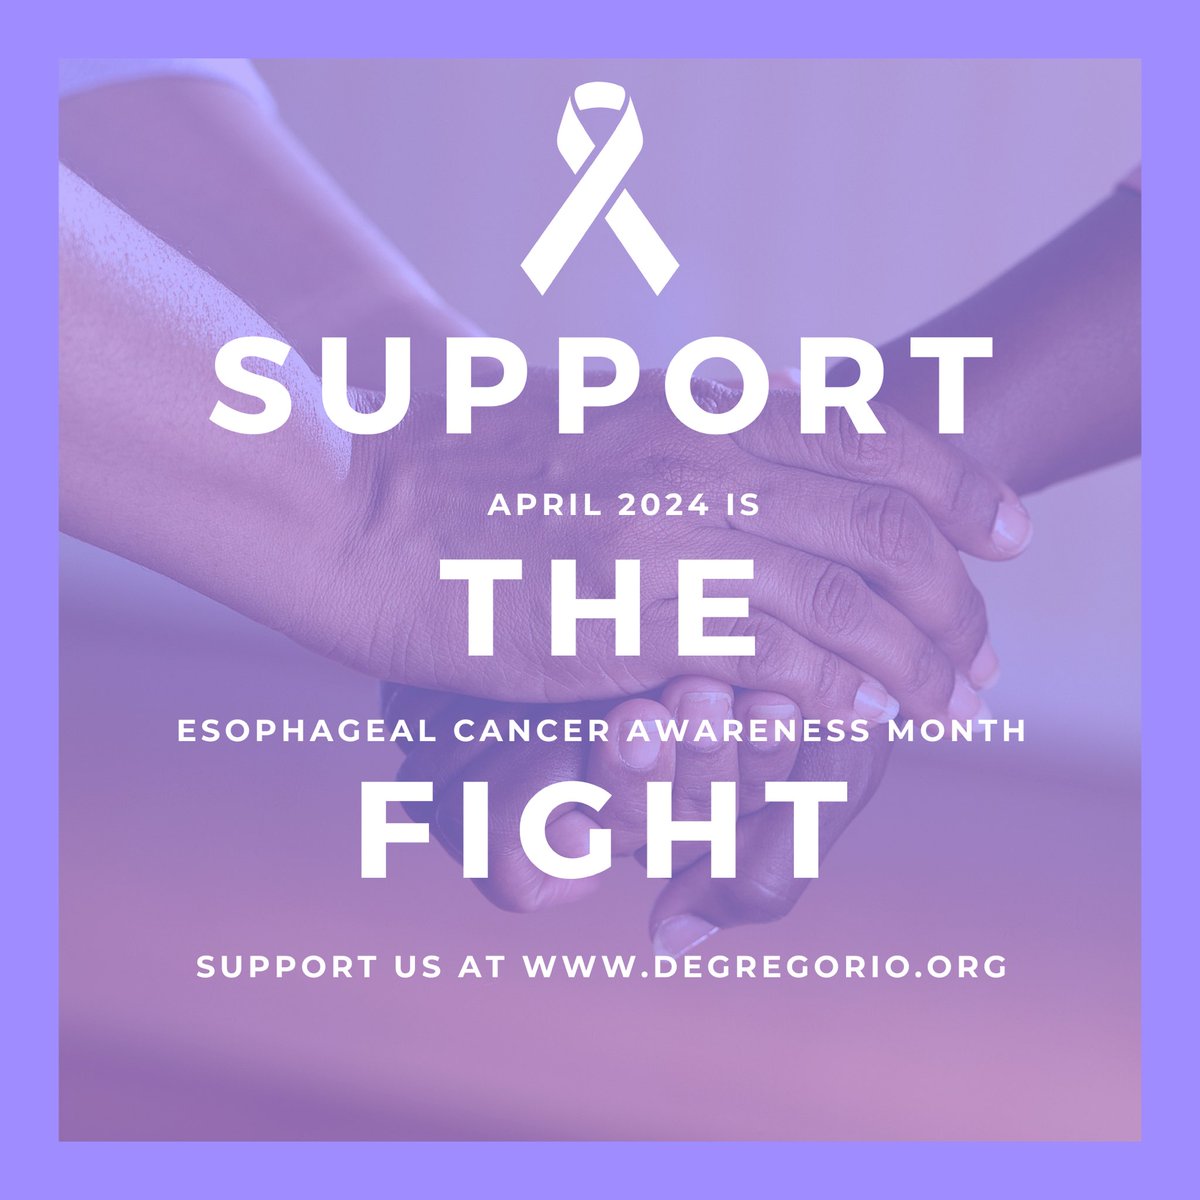 April is Esophageal Cancer Awareness Month. Let's unite to raise awareness and support those affected by this disease. Together, we can make a difference. 💪💙 #EsophagealCancerAwareness #FightCancer #StrengthInUnity